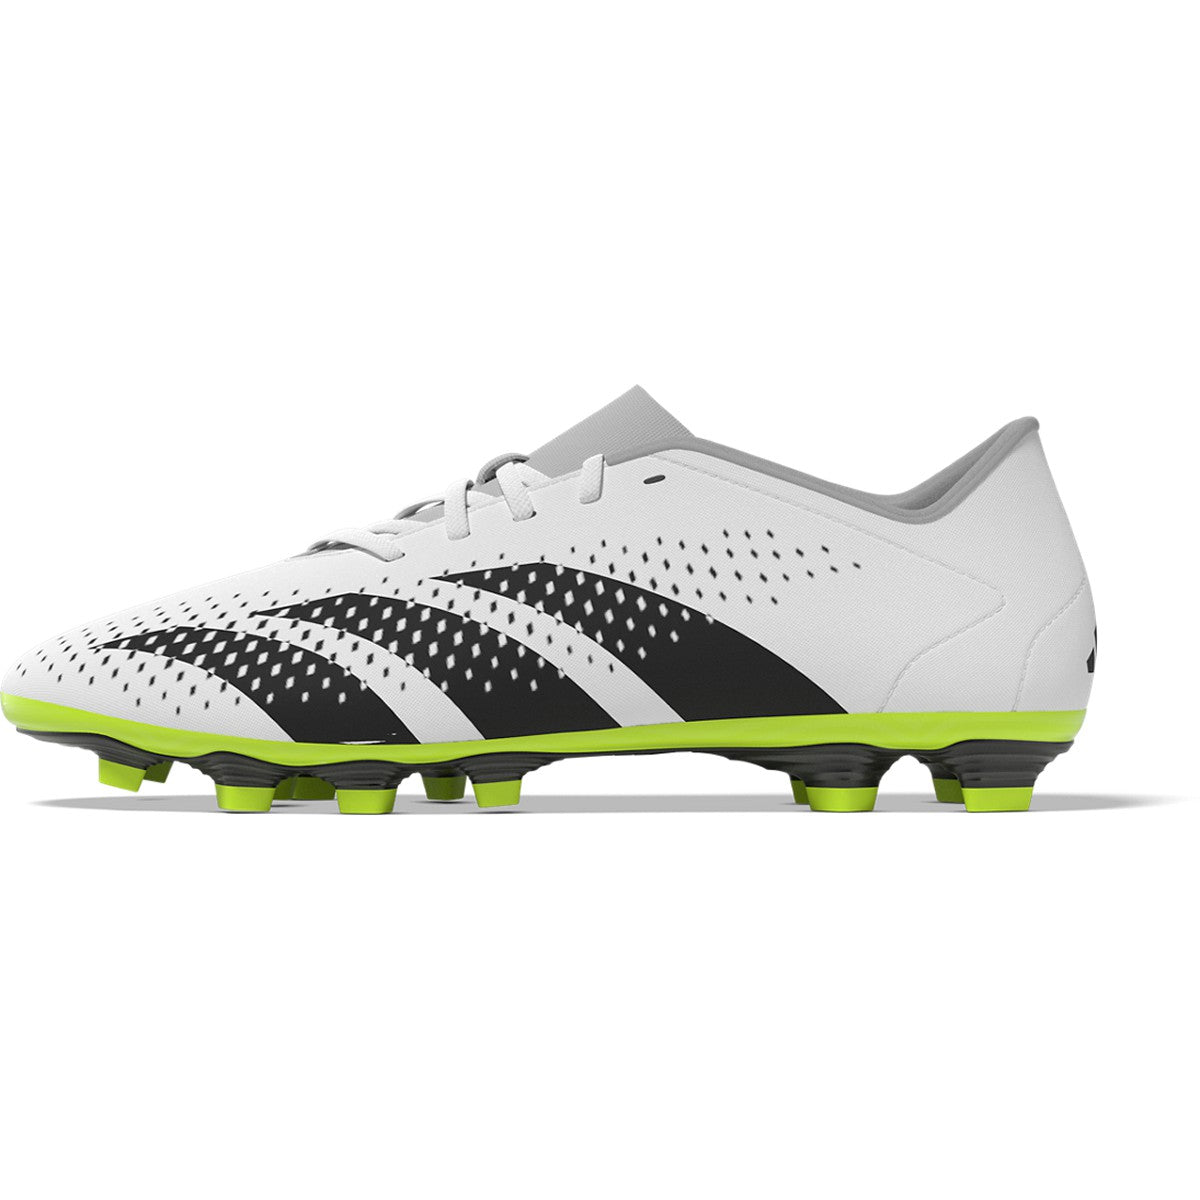 adidas – Predator IE9434 Whit Cleats Zone Cloud Juniors Soccer Soccer Accuracy.4 FxG